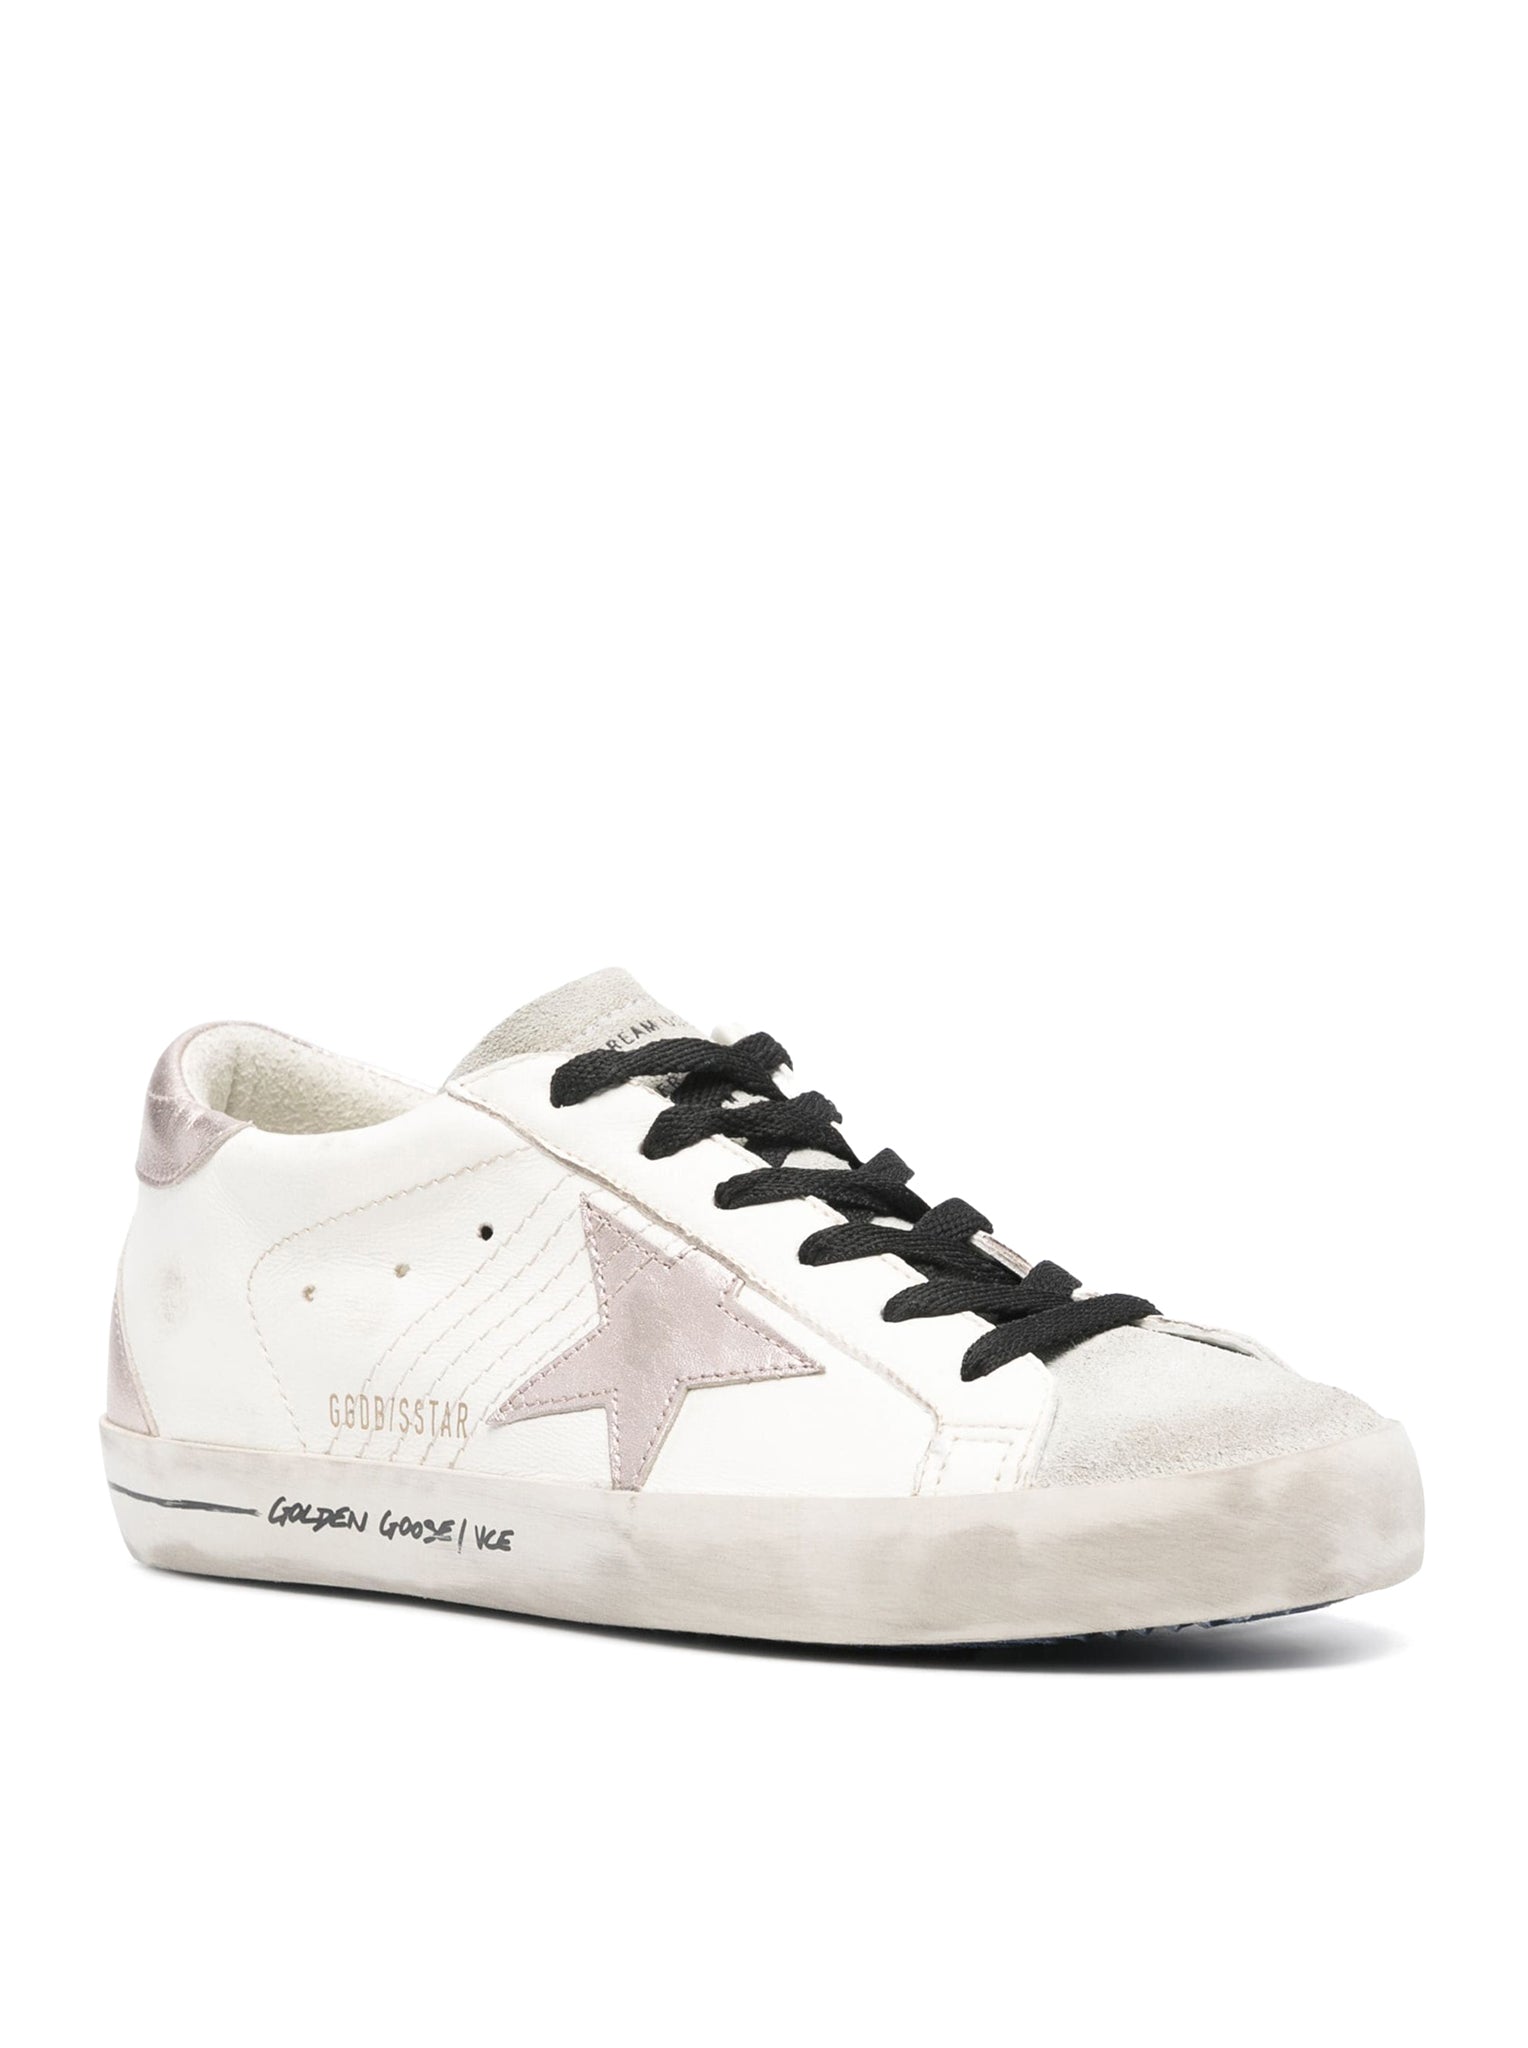 SuperStar leather sneakers